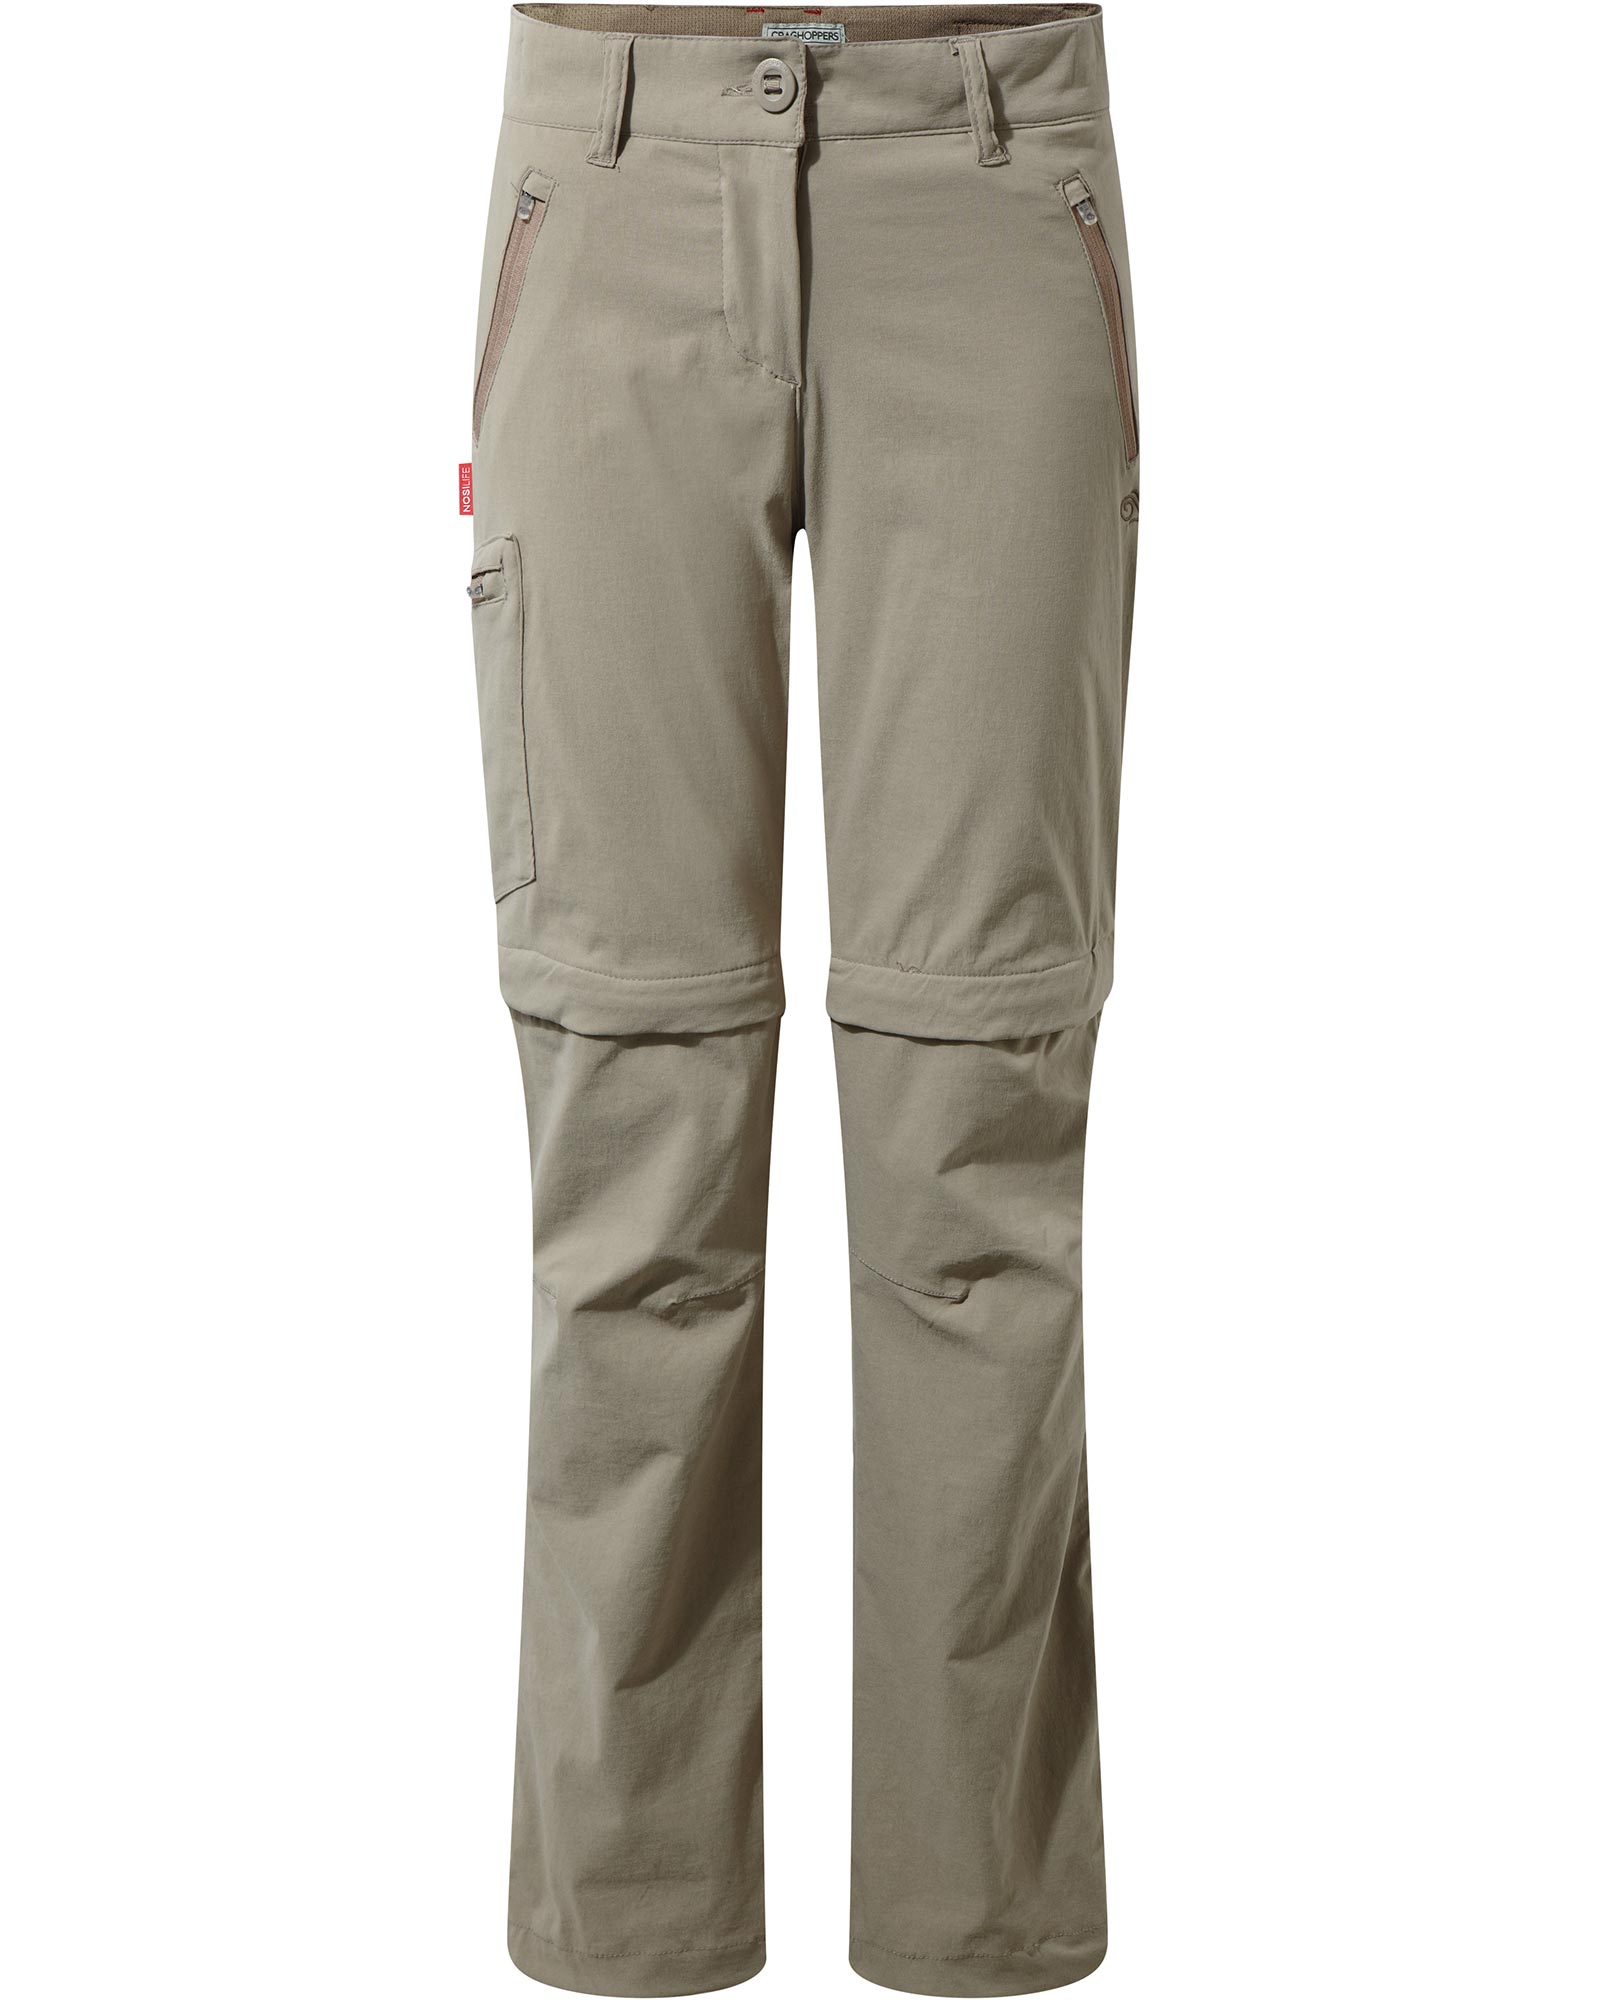 Craghoppers Nosilife Pro Convertible Womens Pants